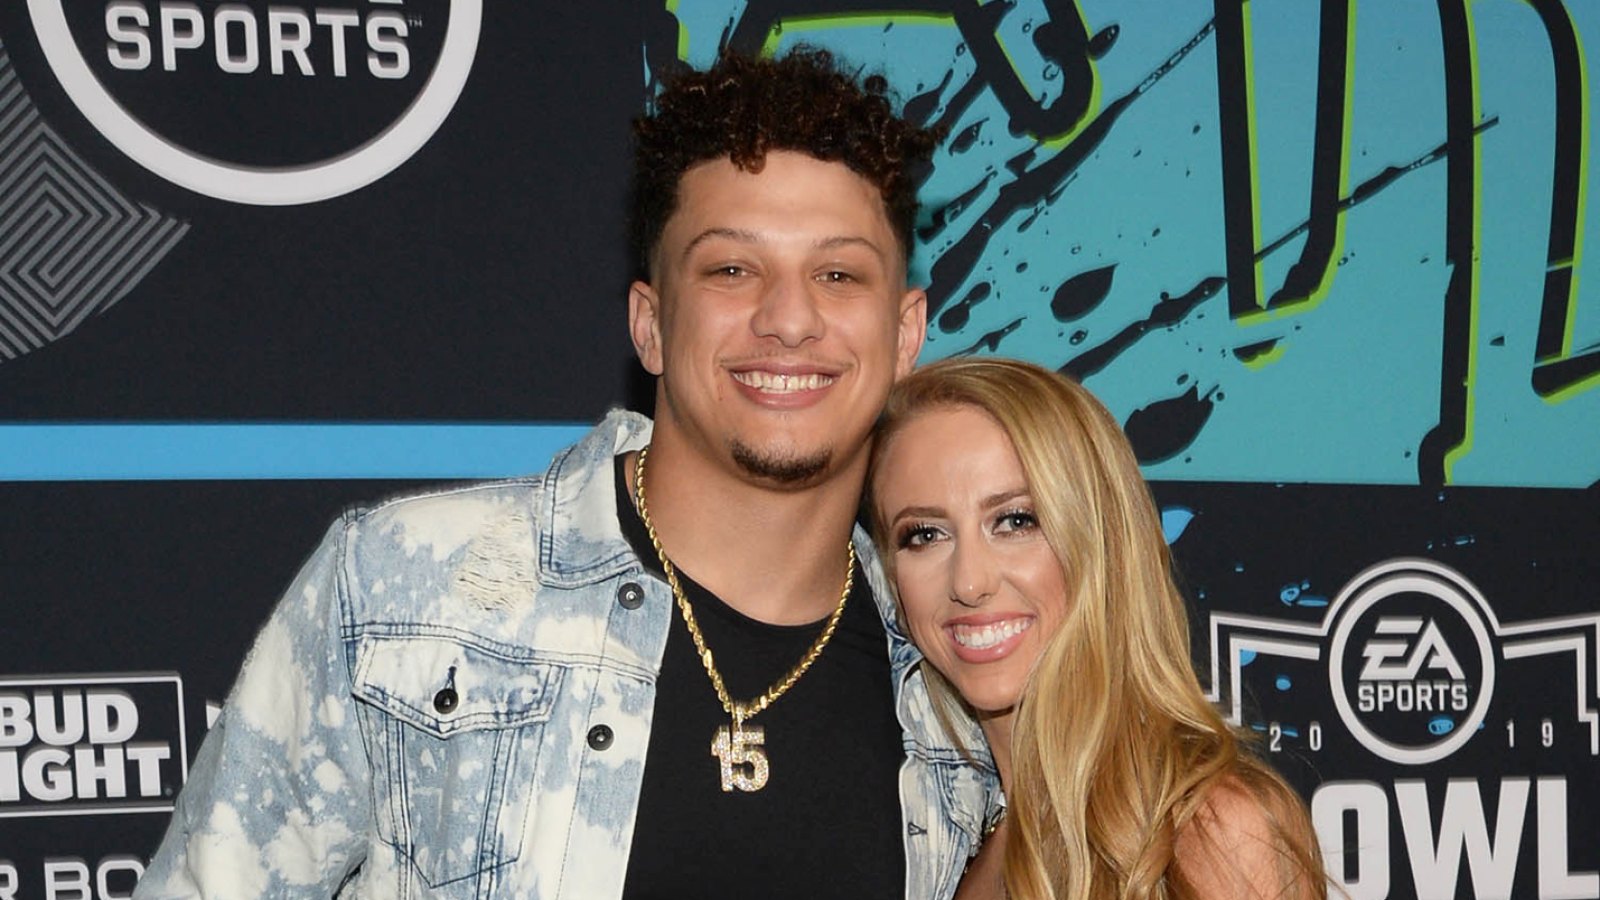 Brittany Matthews Reacts to 'Gold Digger' Insult, Talks Women Hitting on Patrick Mahomes